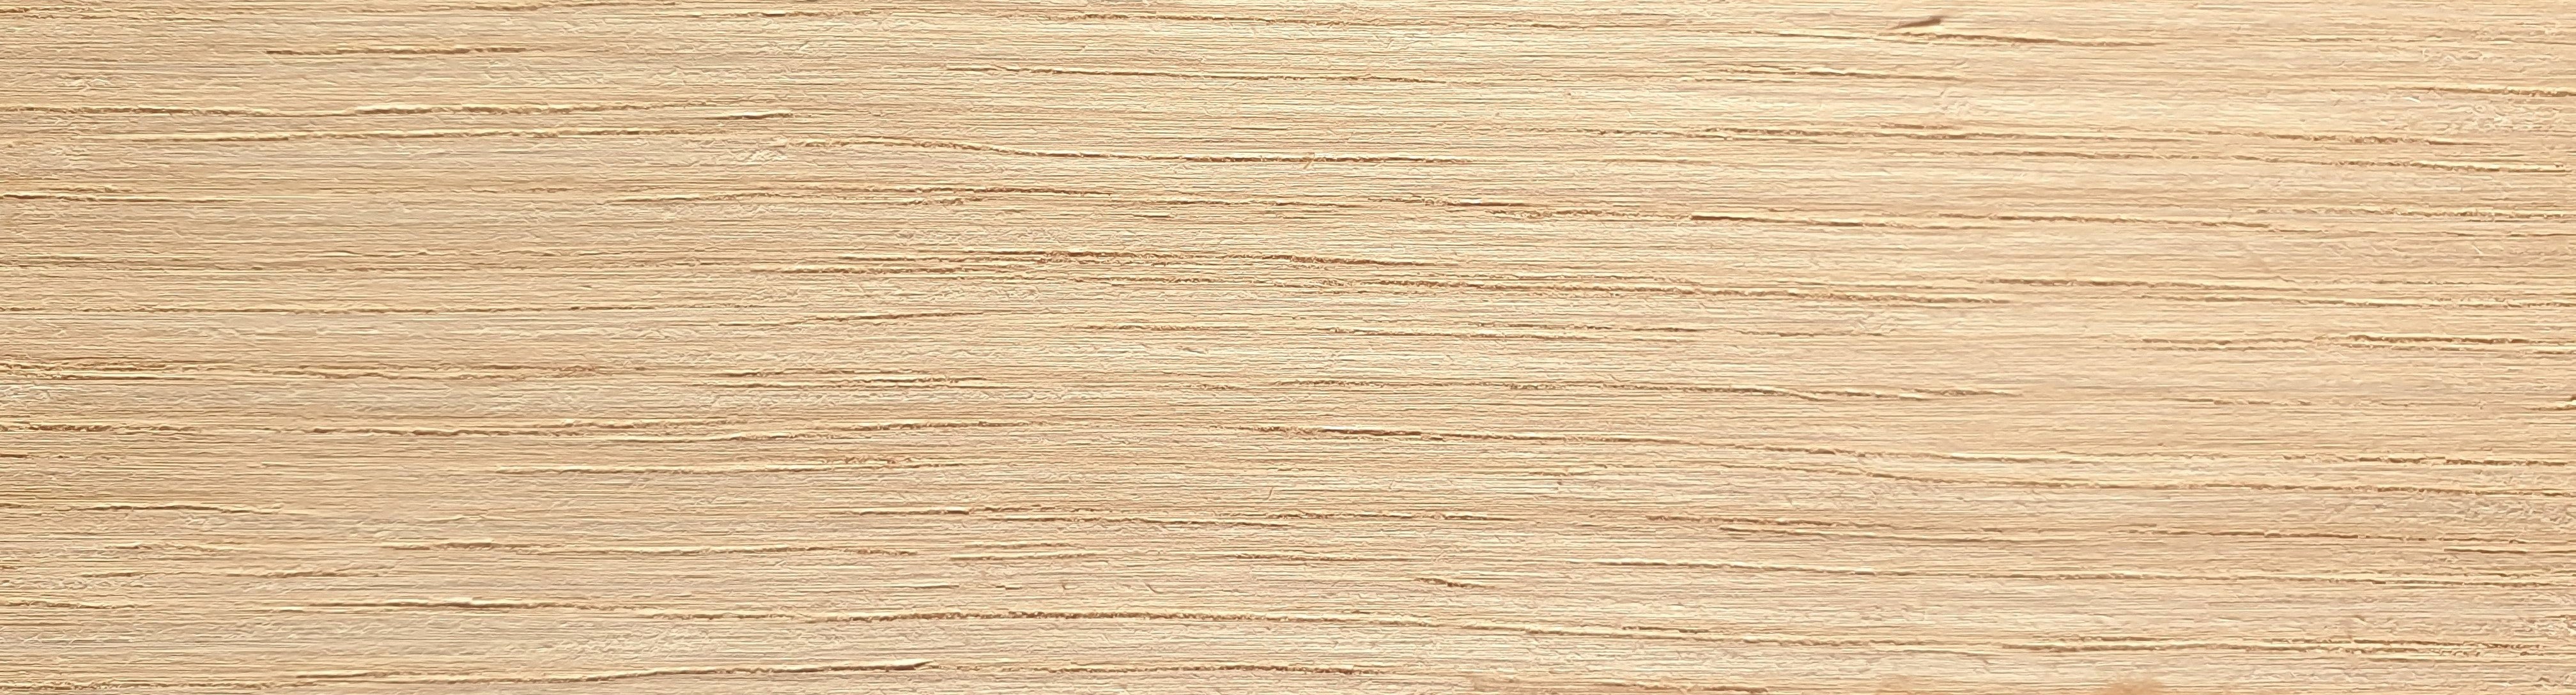 American White Oak Unglued Thickwood Edging / Lipping 22mm x 2mm Thick Oak Wood Edging